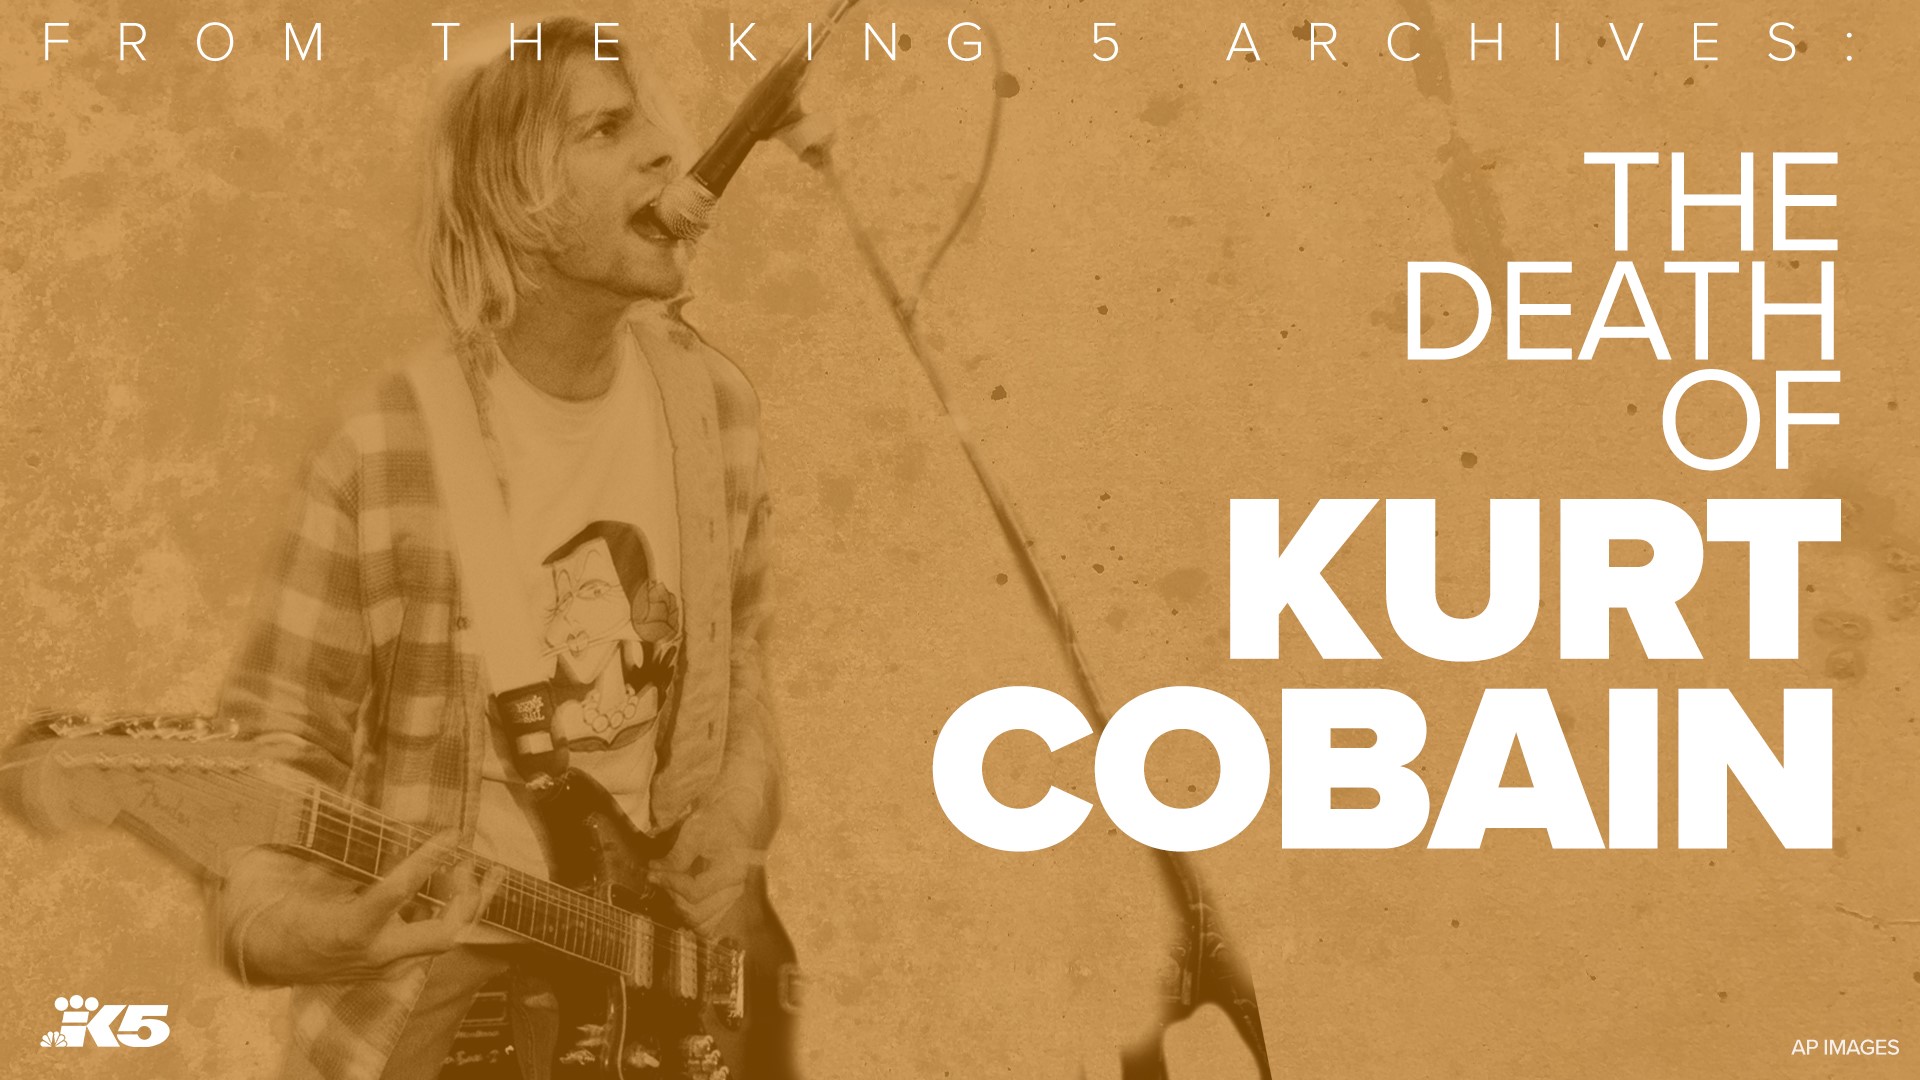 A look back at KING 5's coverage when it was discovered that Kurt Cobain had died